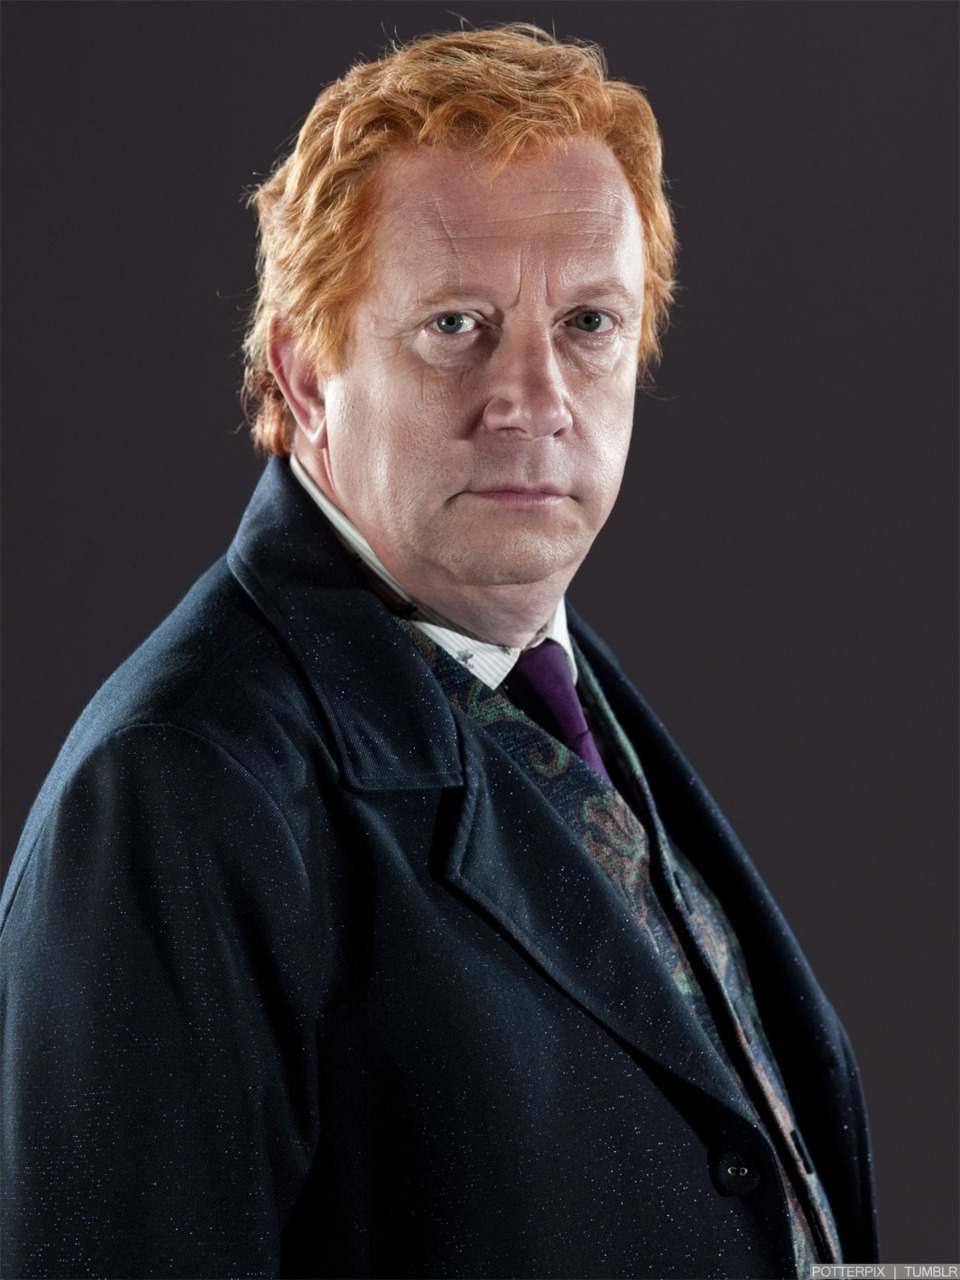 Who portrayed Molly Weasley Sr. in the Harry Potter movies? 2